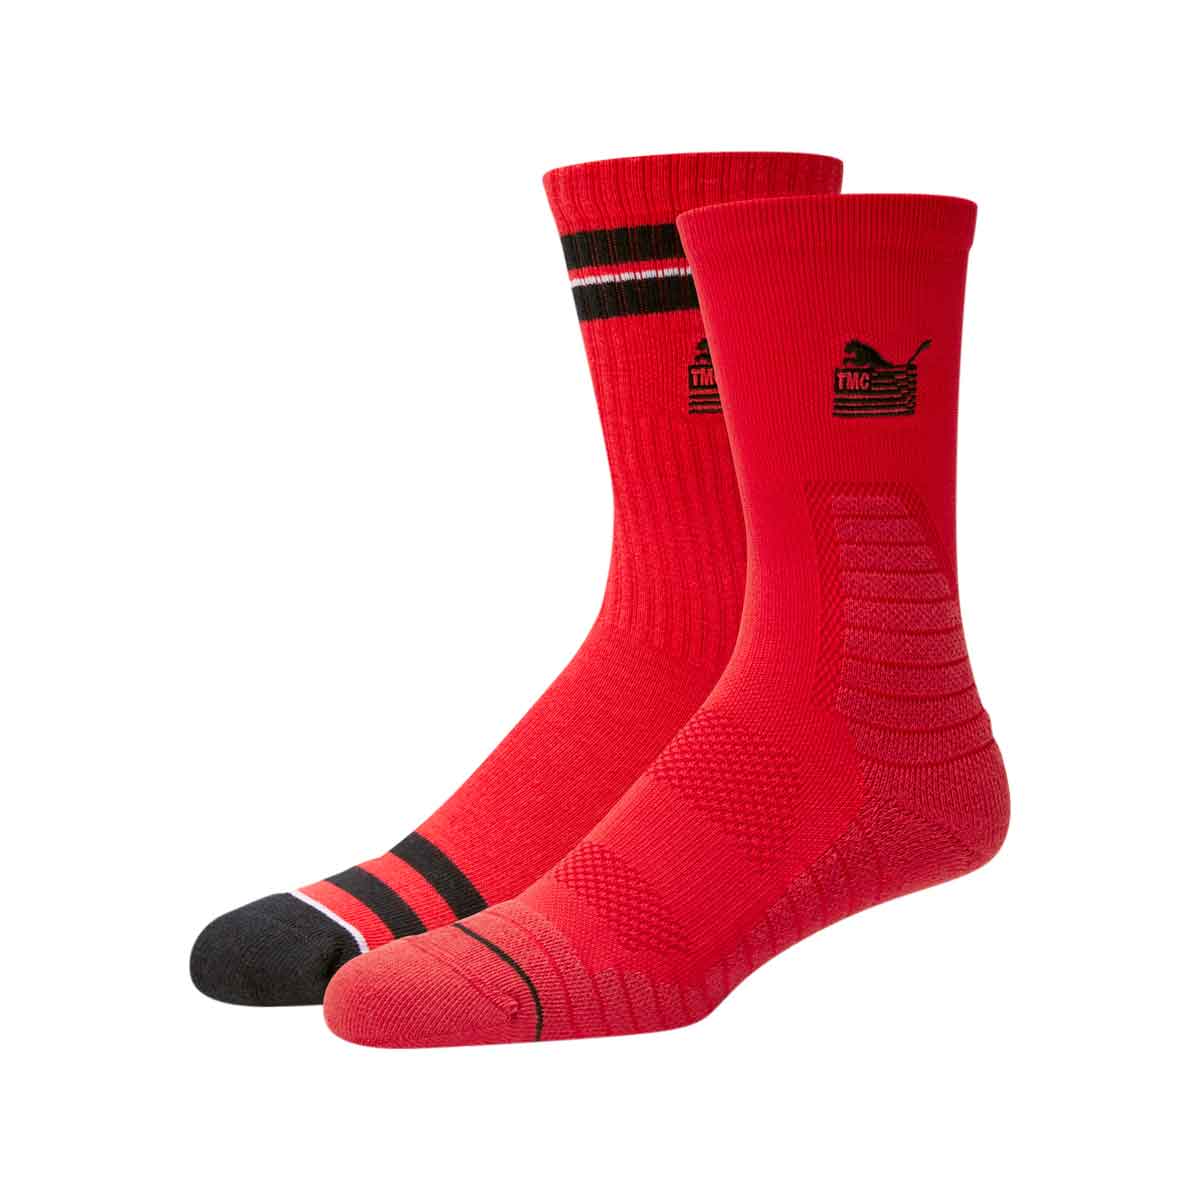 PUMA x TMC Everyday Hussle Collection Socks - Red/Black (2 pack)